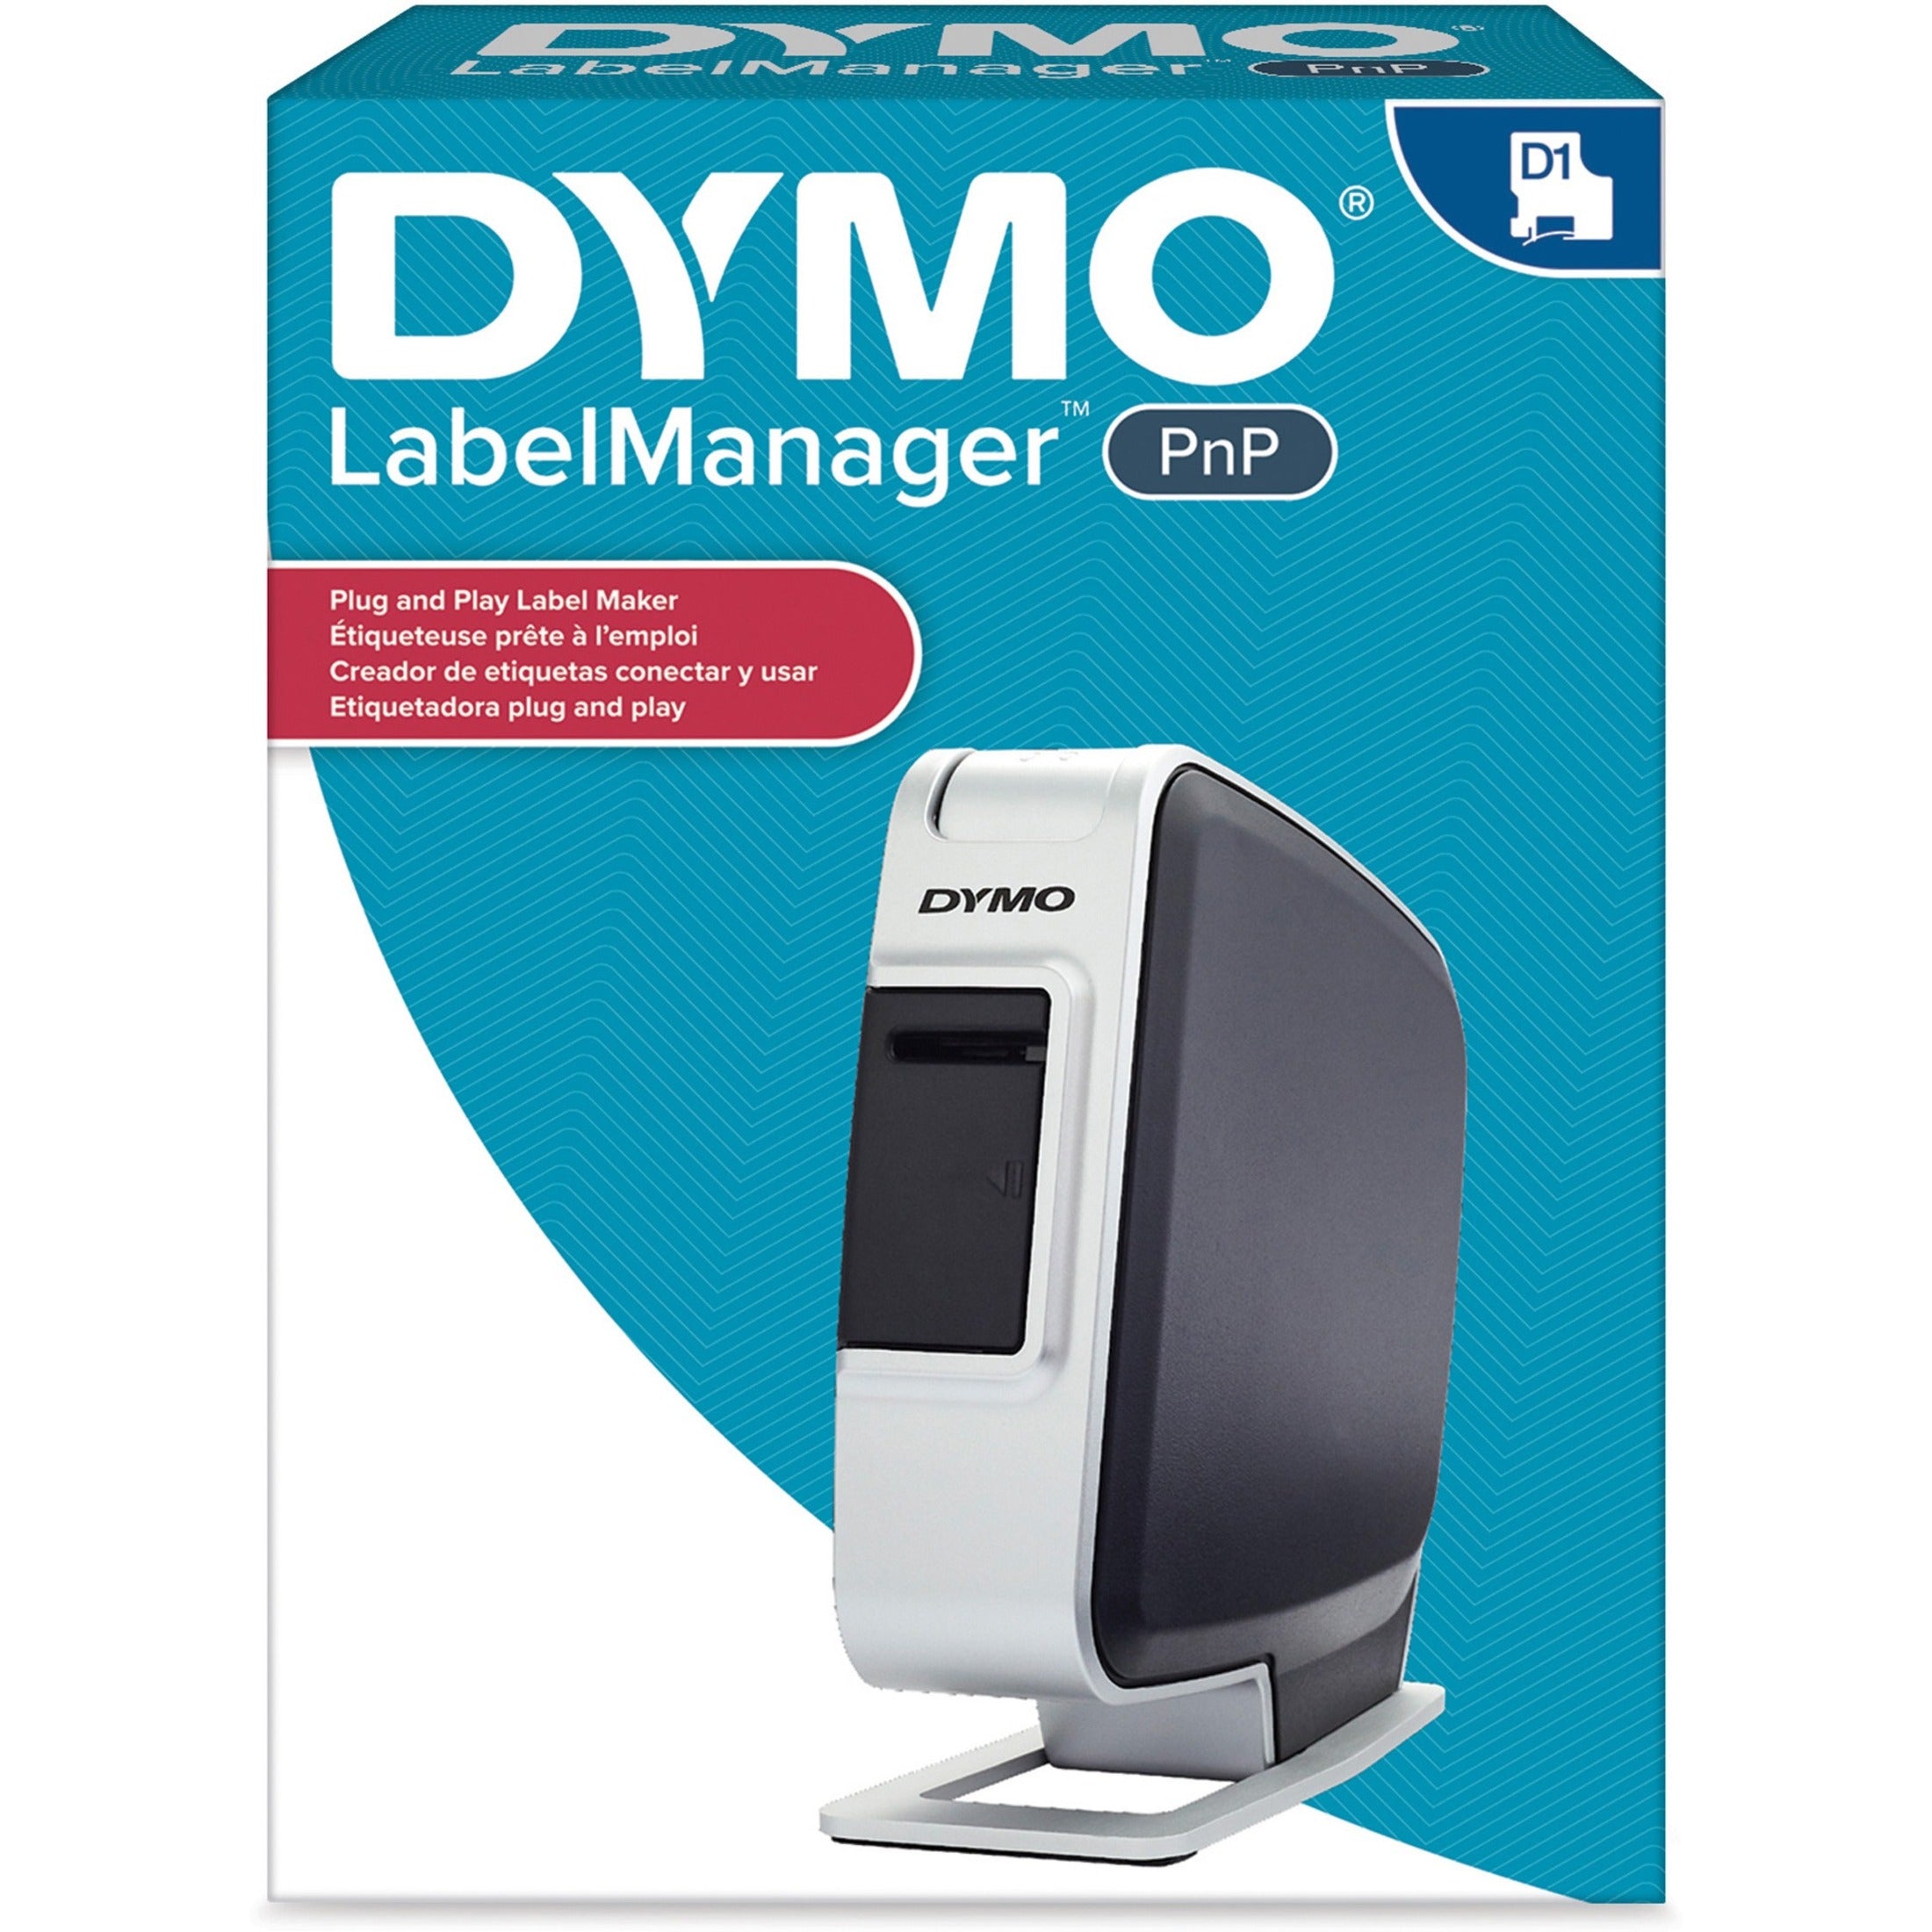 Dymo 1768960 LabelManager Plug-and-Play Labelmaker, 22.7pt, 2-1/2x5-1/2x5-3/10, Battery-Powered